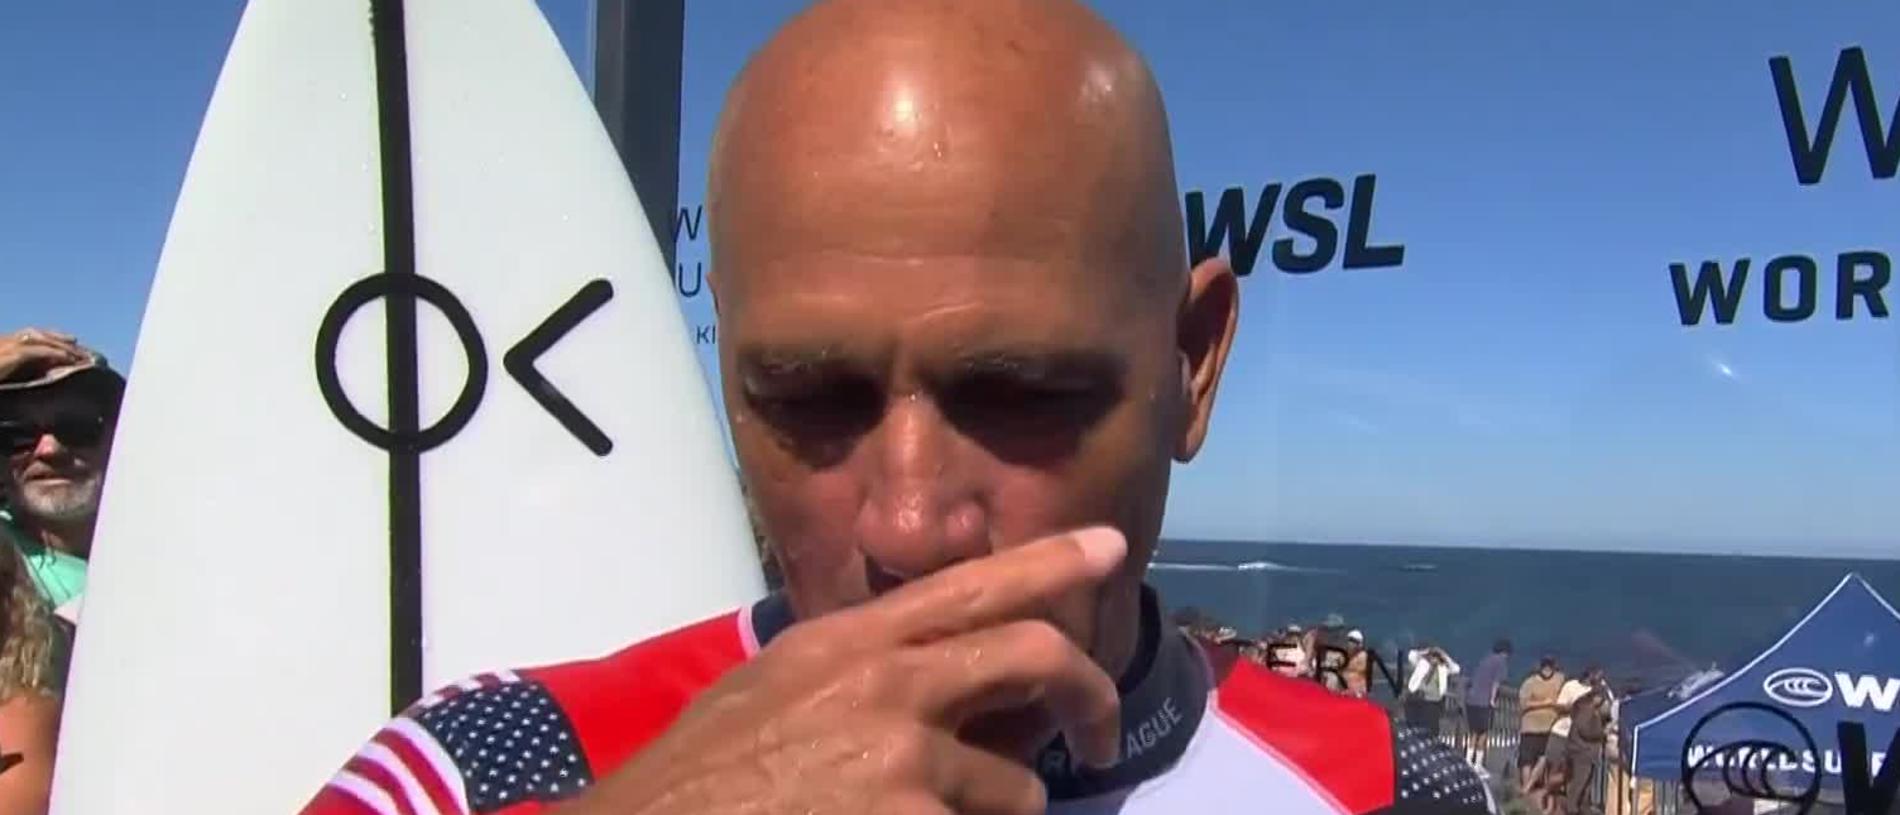 Kelly Slater's emotional interview after loss